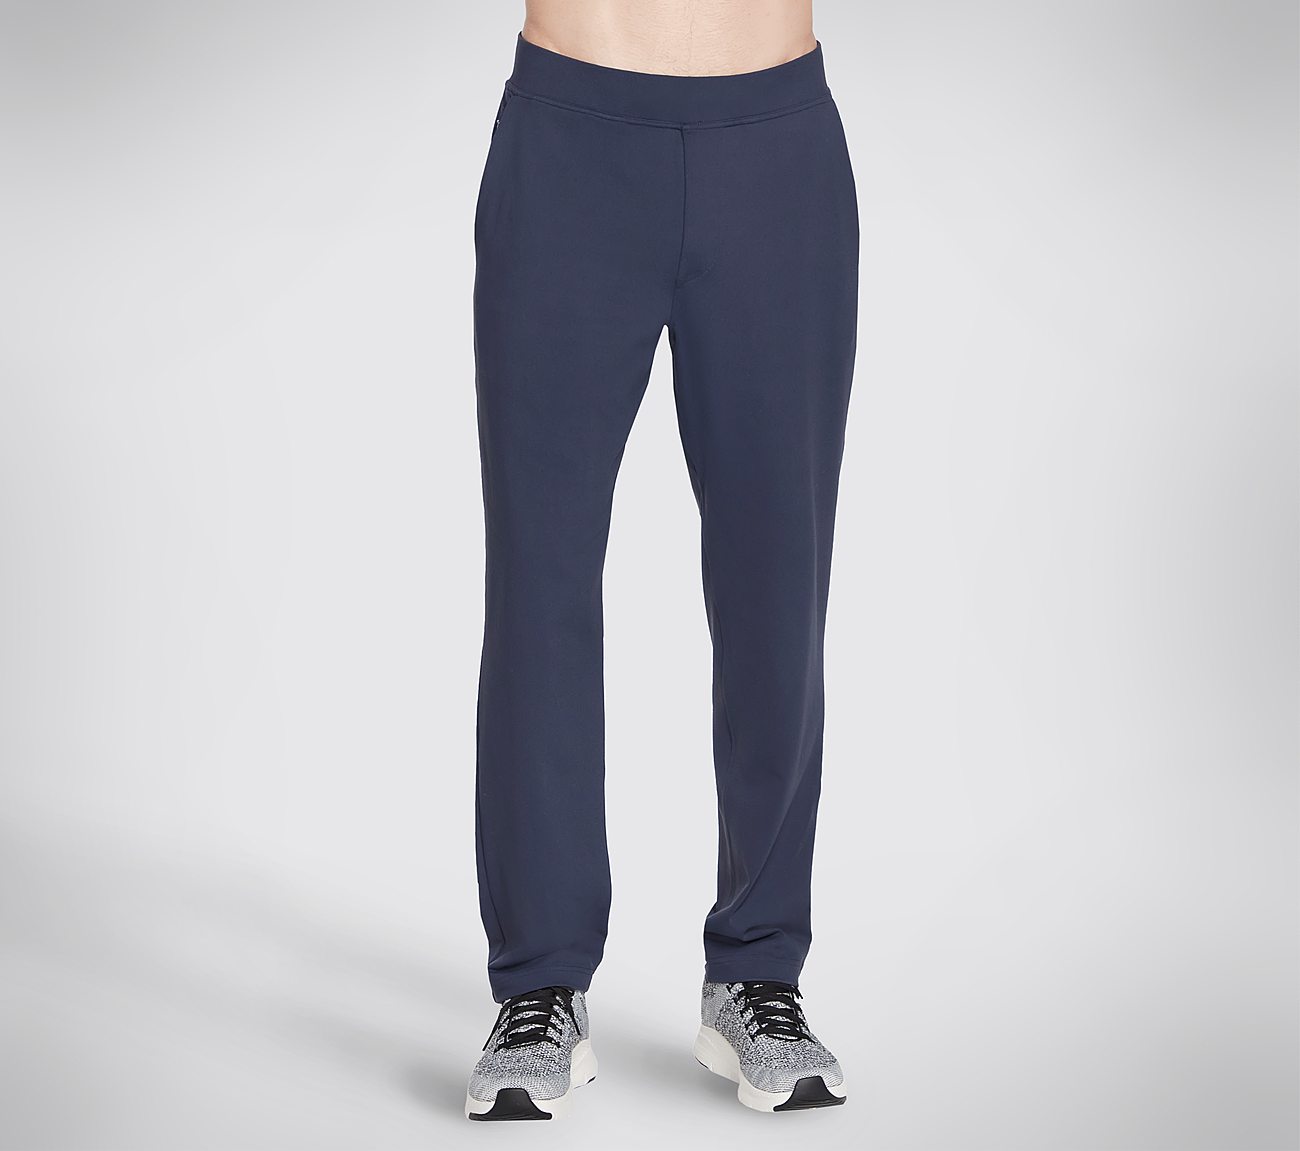 THE GOWALK PANT RECHARGE, NNNAVY Apparel Lateral View